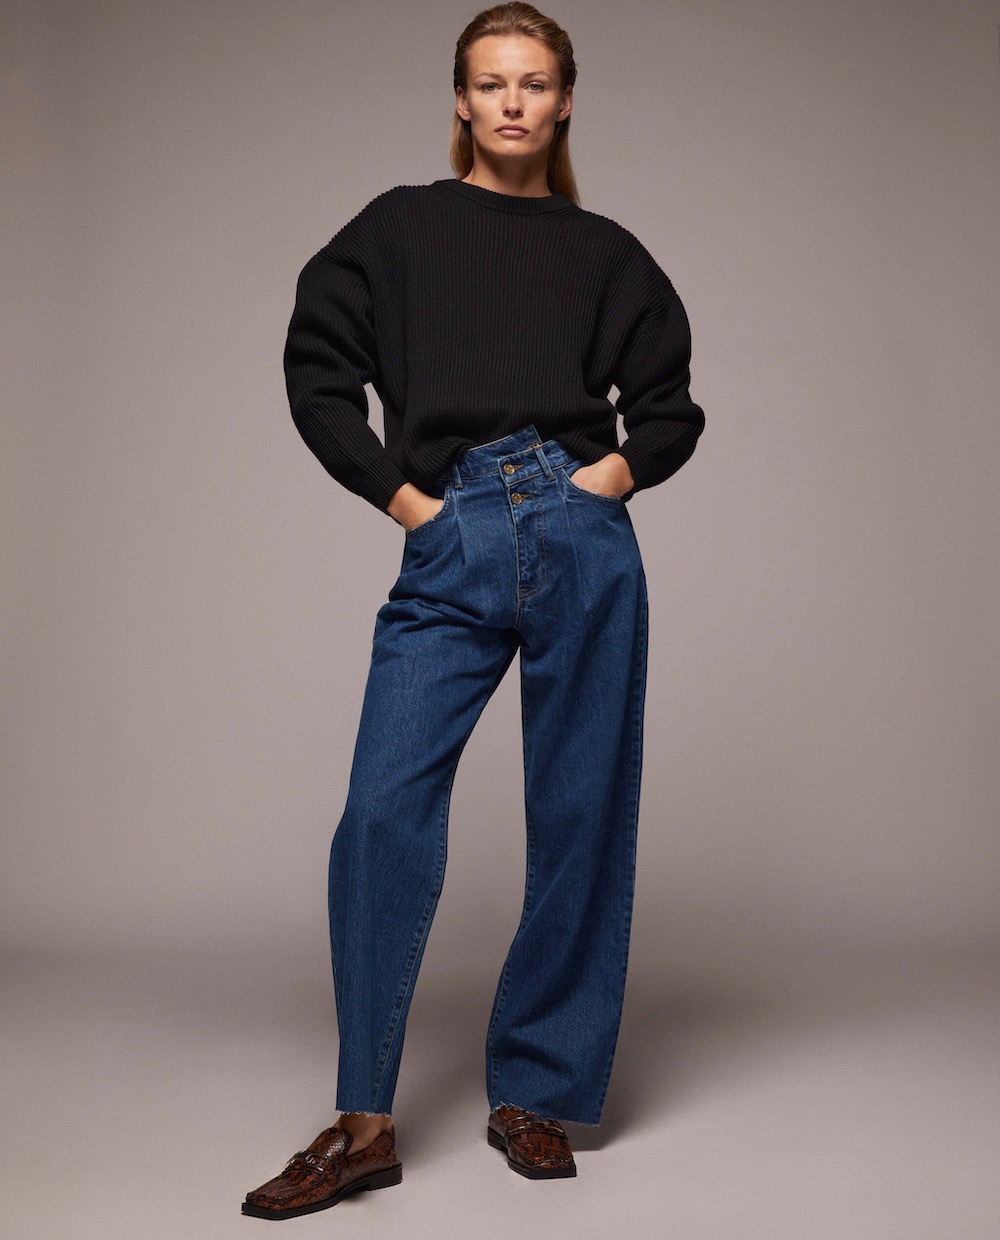 Baggy Jeans and How to Wear Them - theFashionSpot